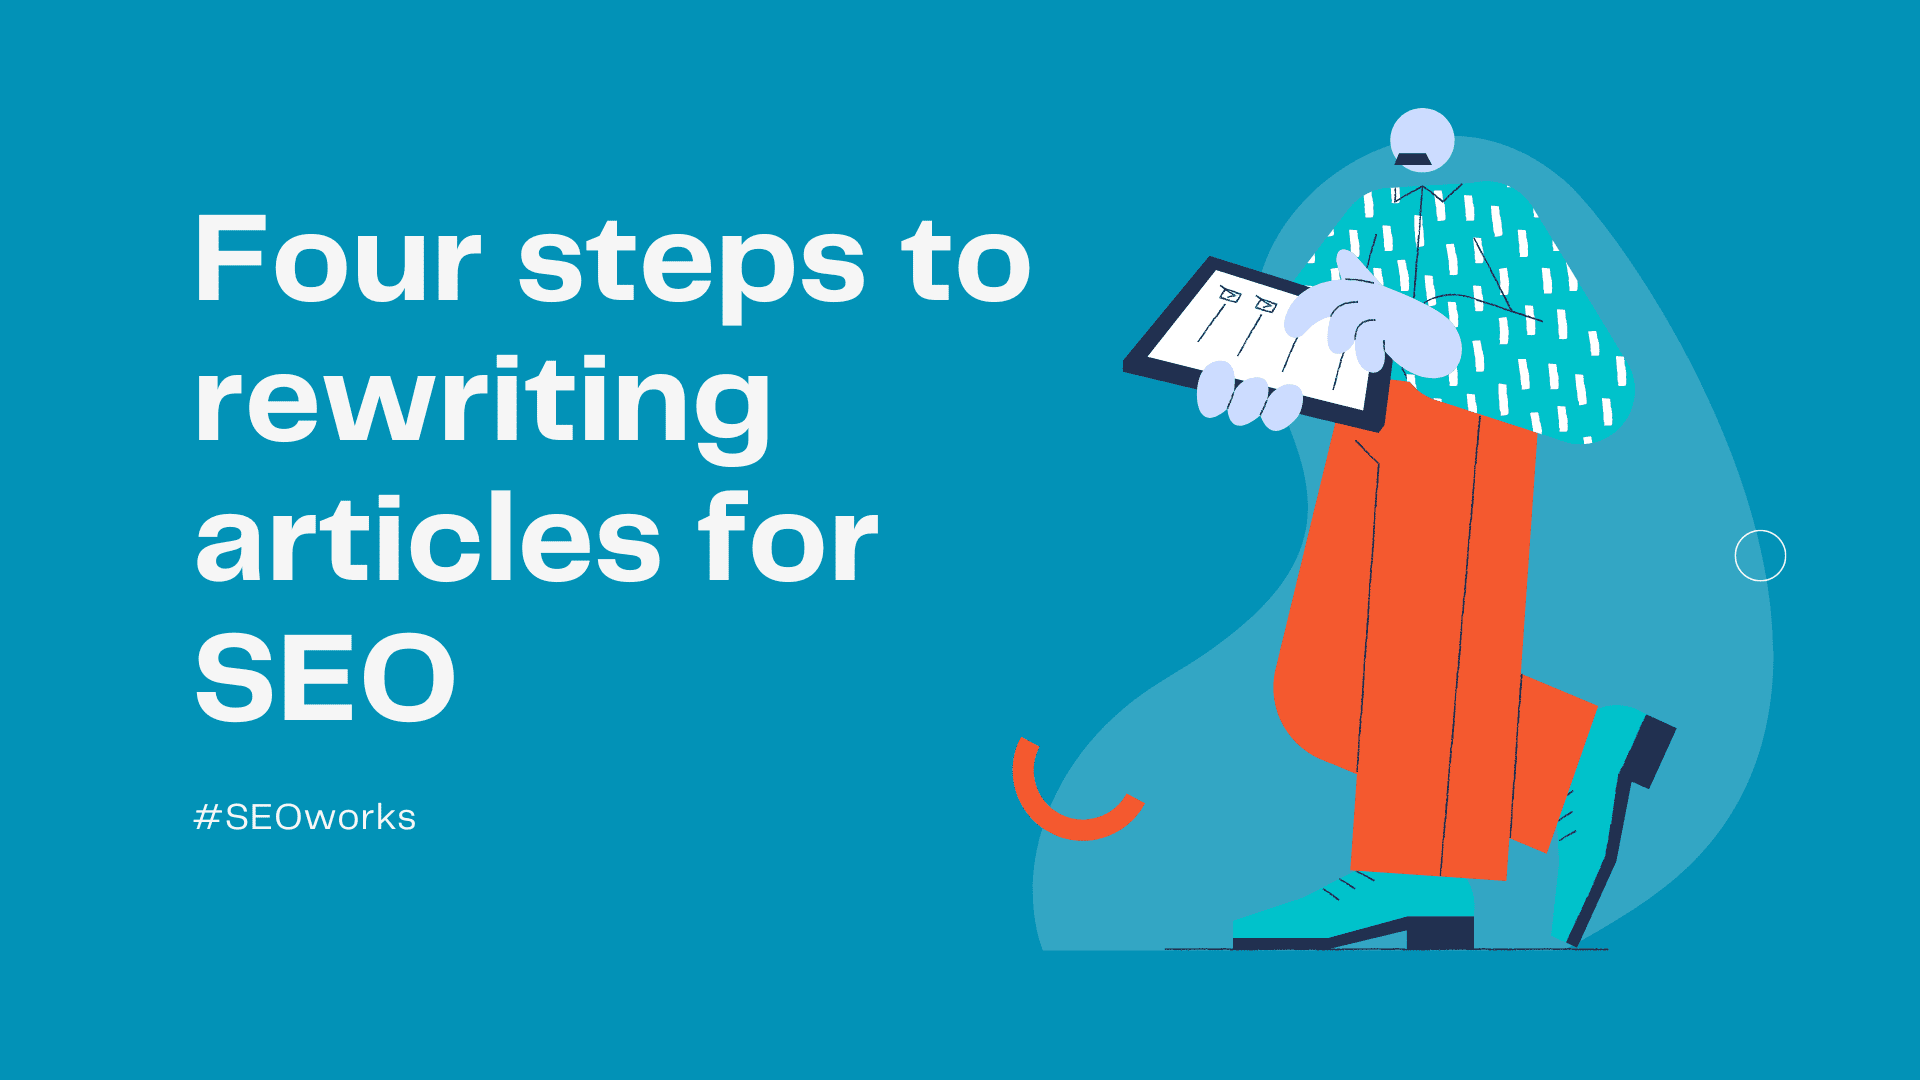 Steps for rewriting articles for SEO